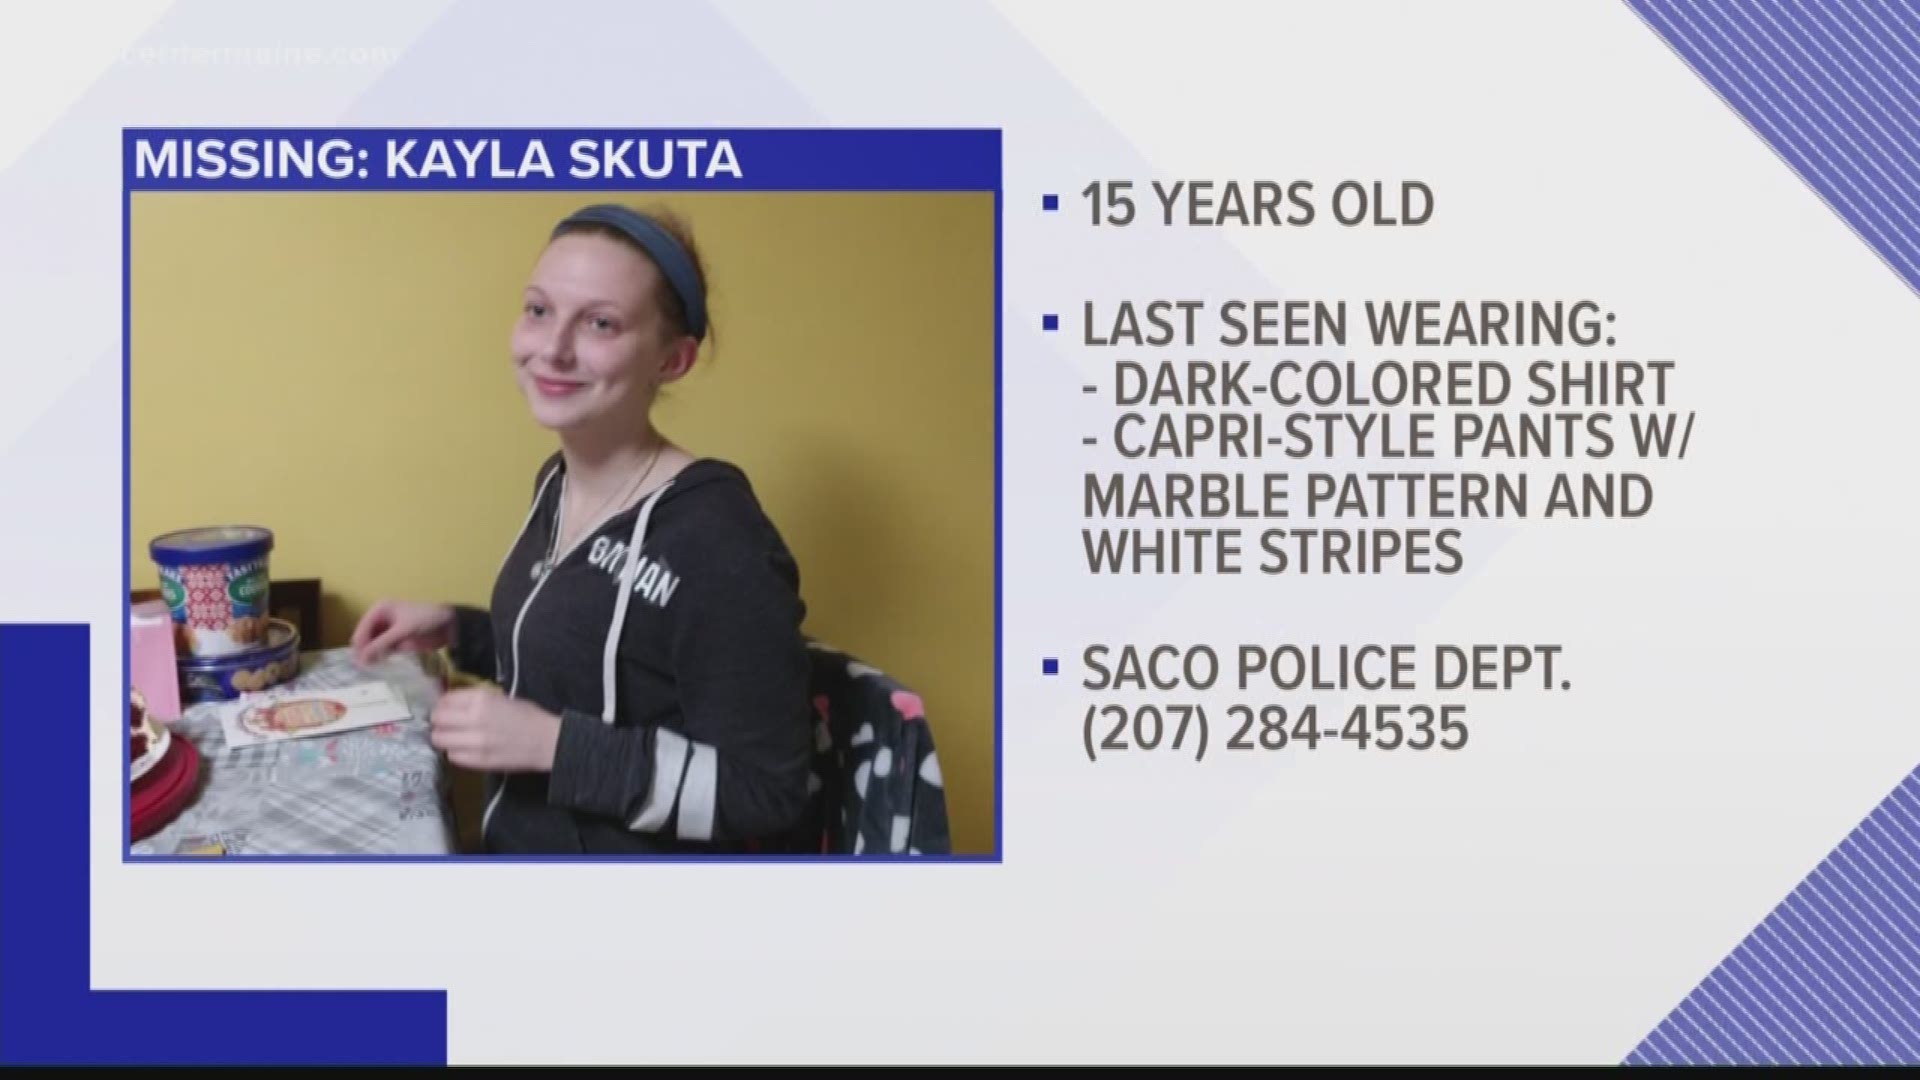 The Saco Police Department is asking for help finding Kayla Skuta, 15, of Saco.